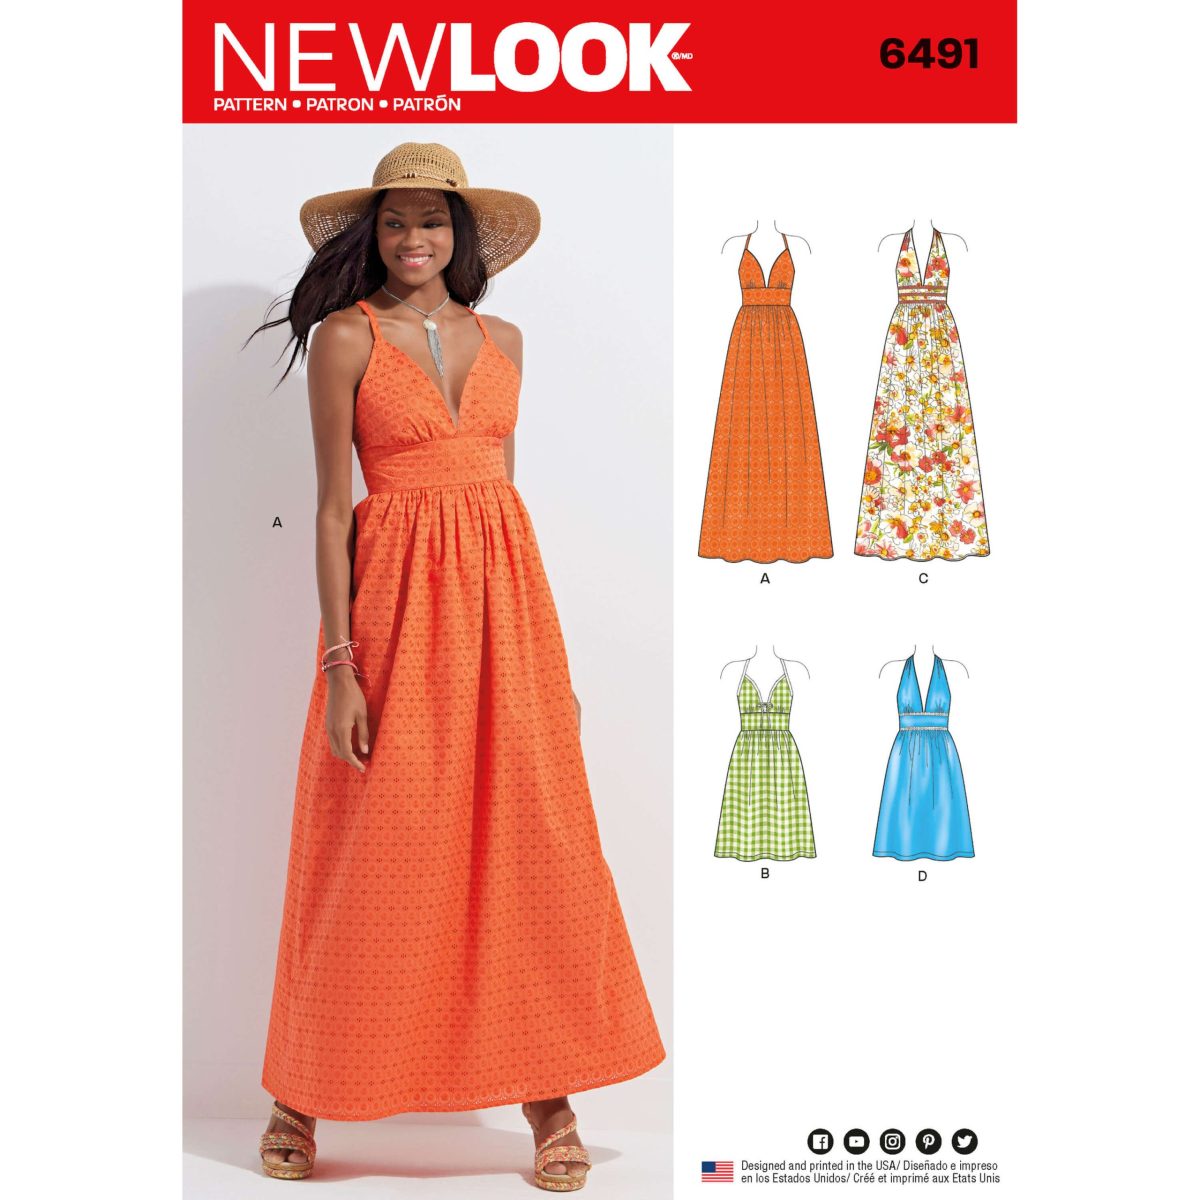 New Look Pattern 6491 Misses Dresses in two Lengths with Bodice Variations